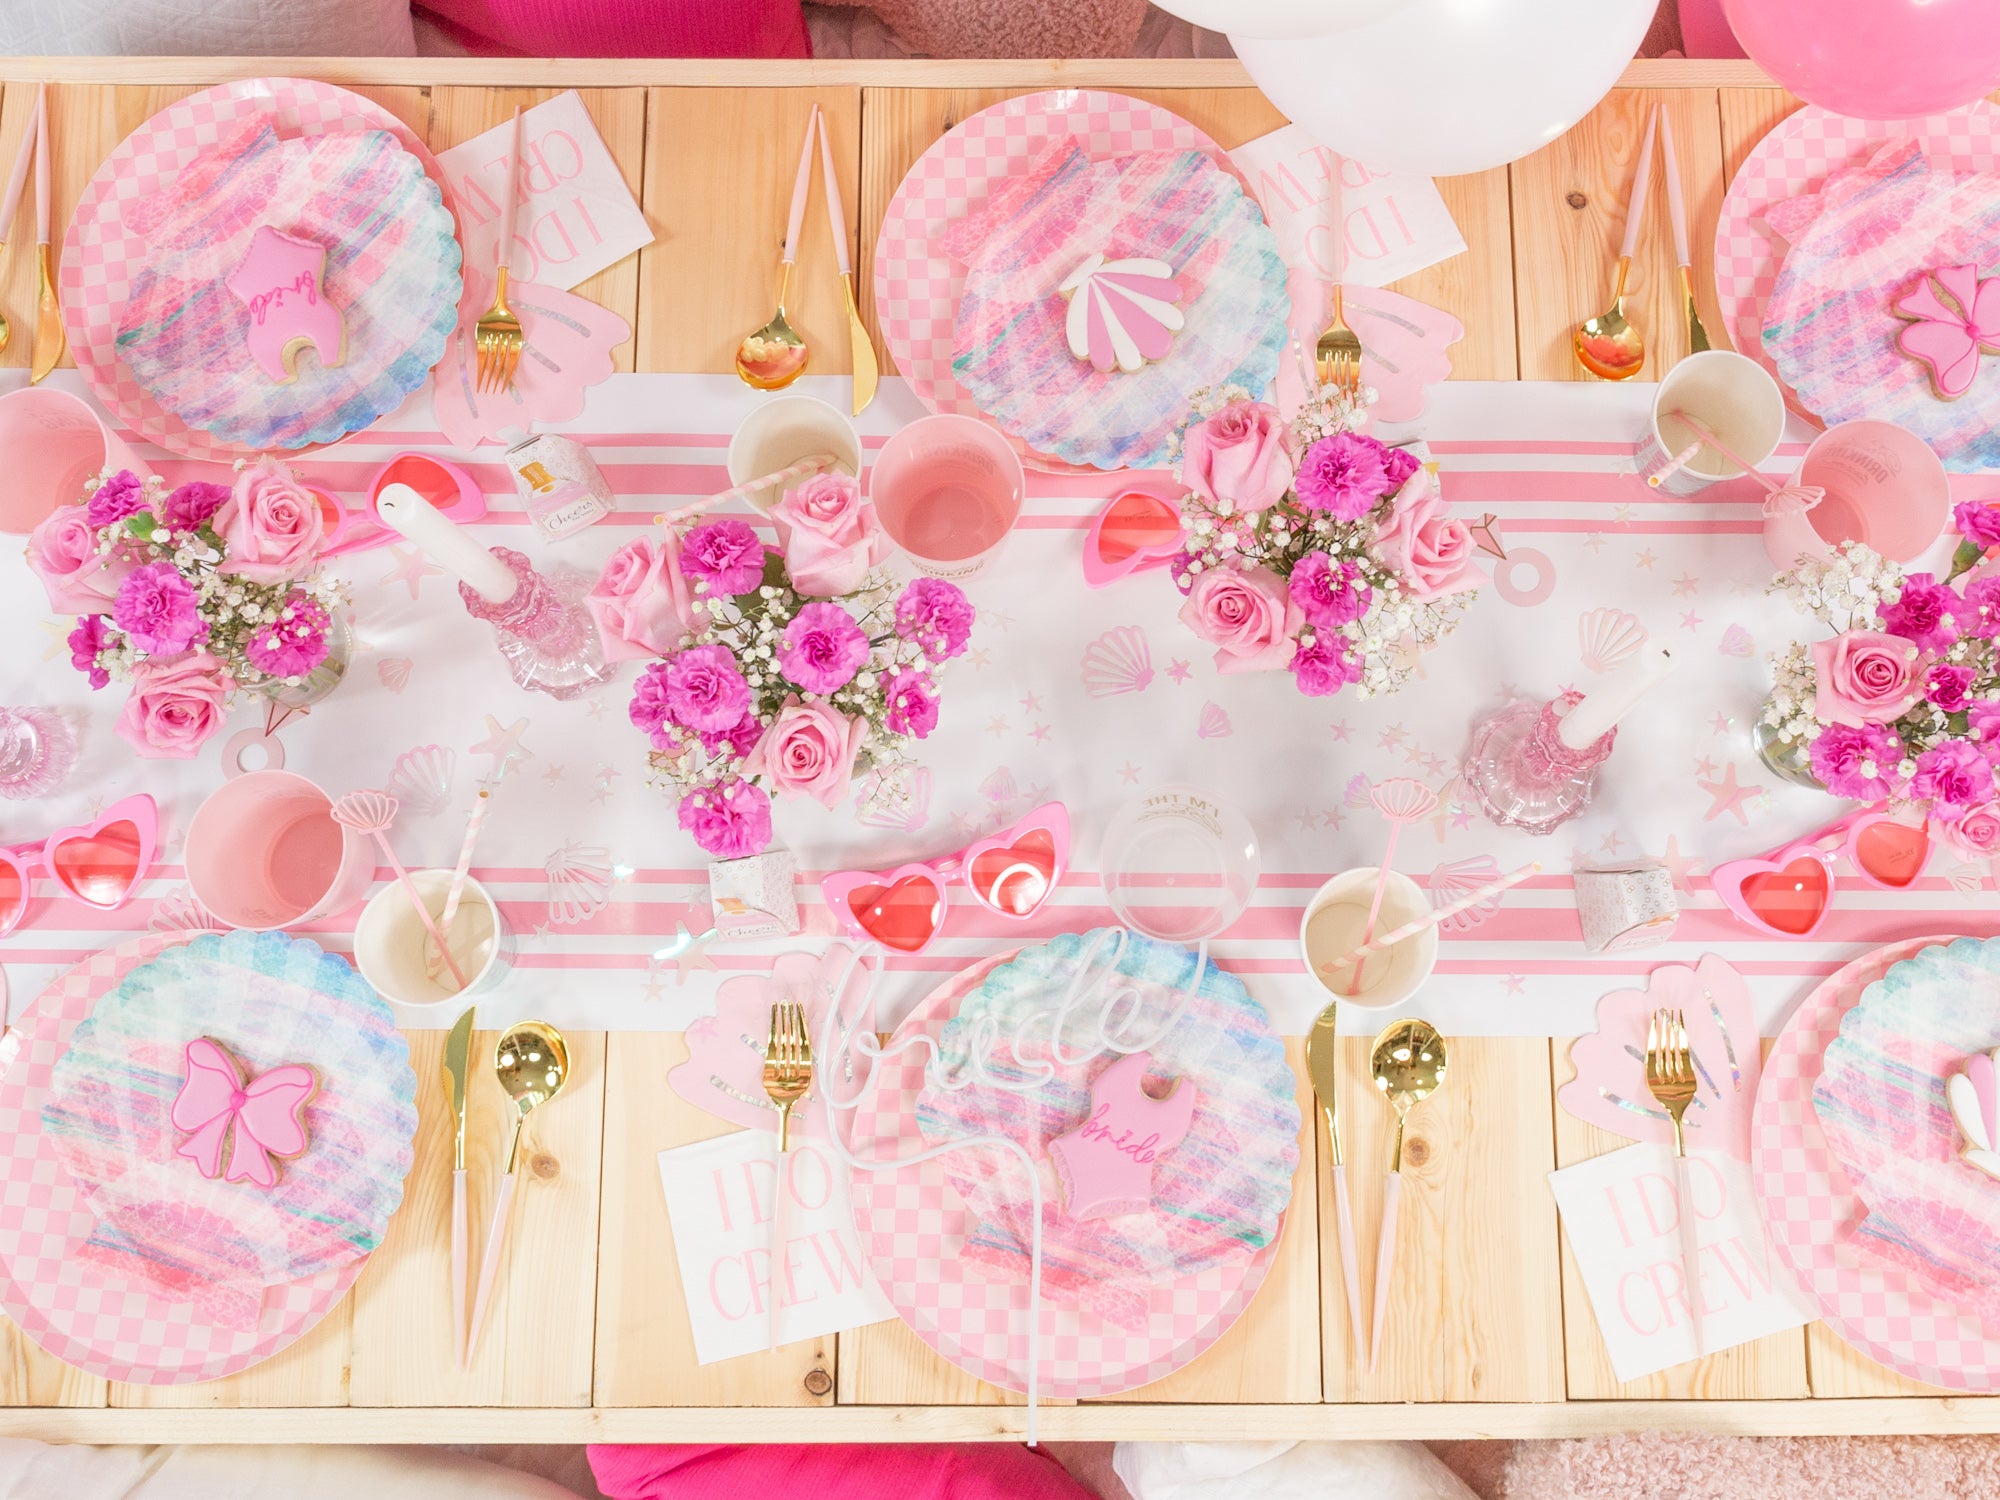 Overview of Bachelorette Party Table | The Party Darling